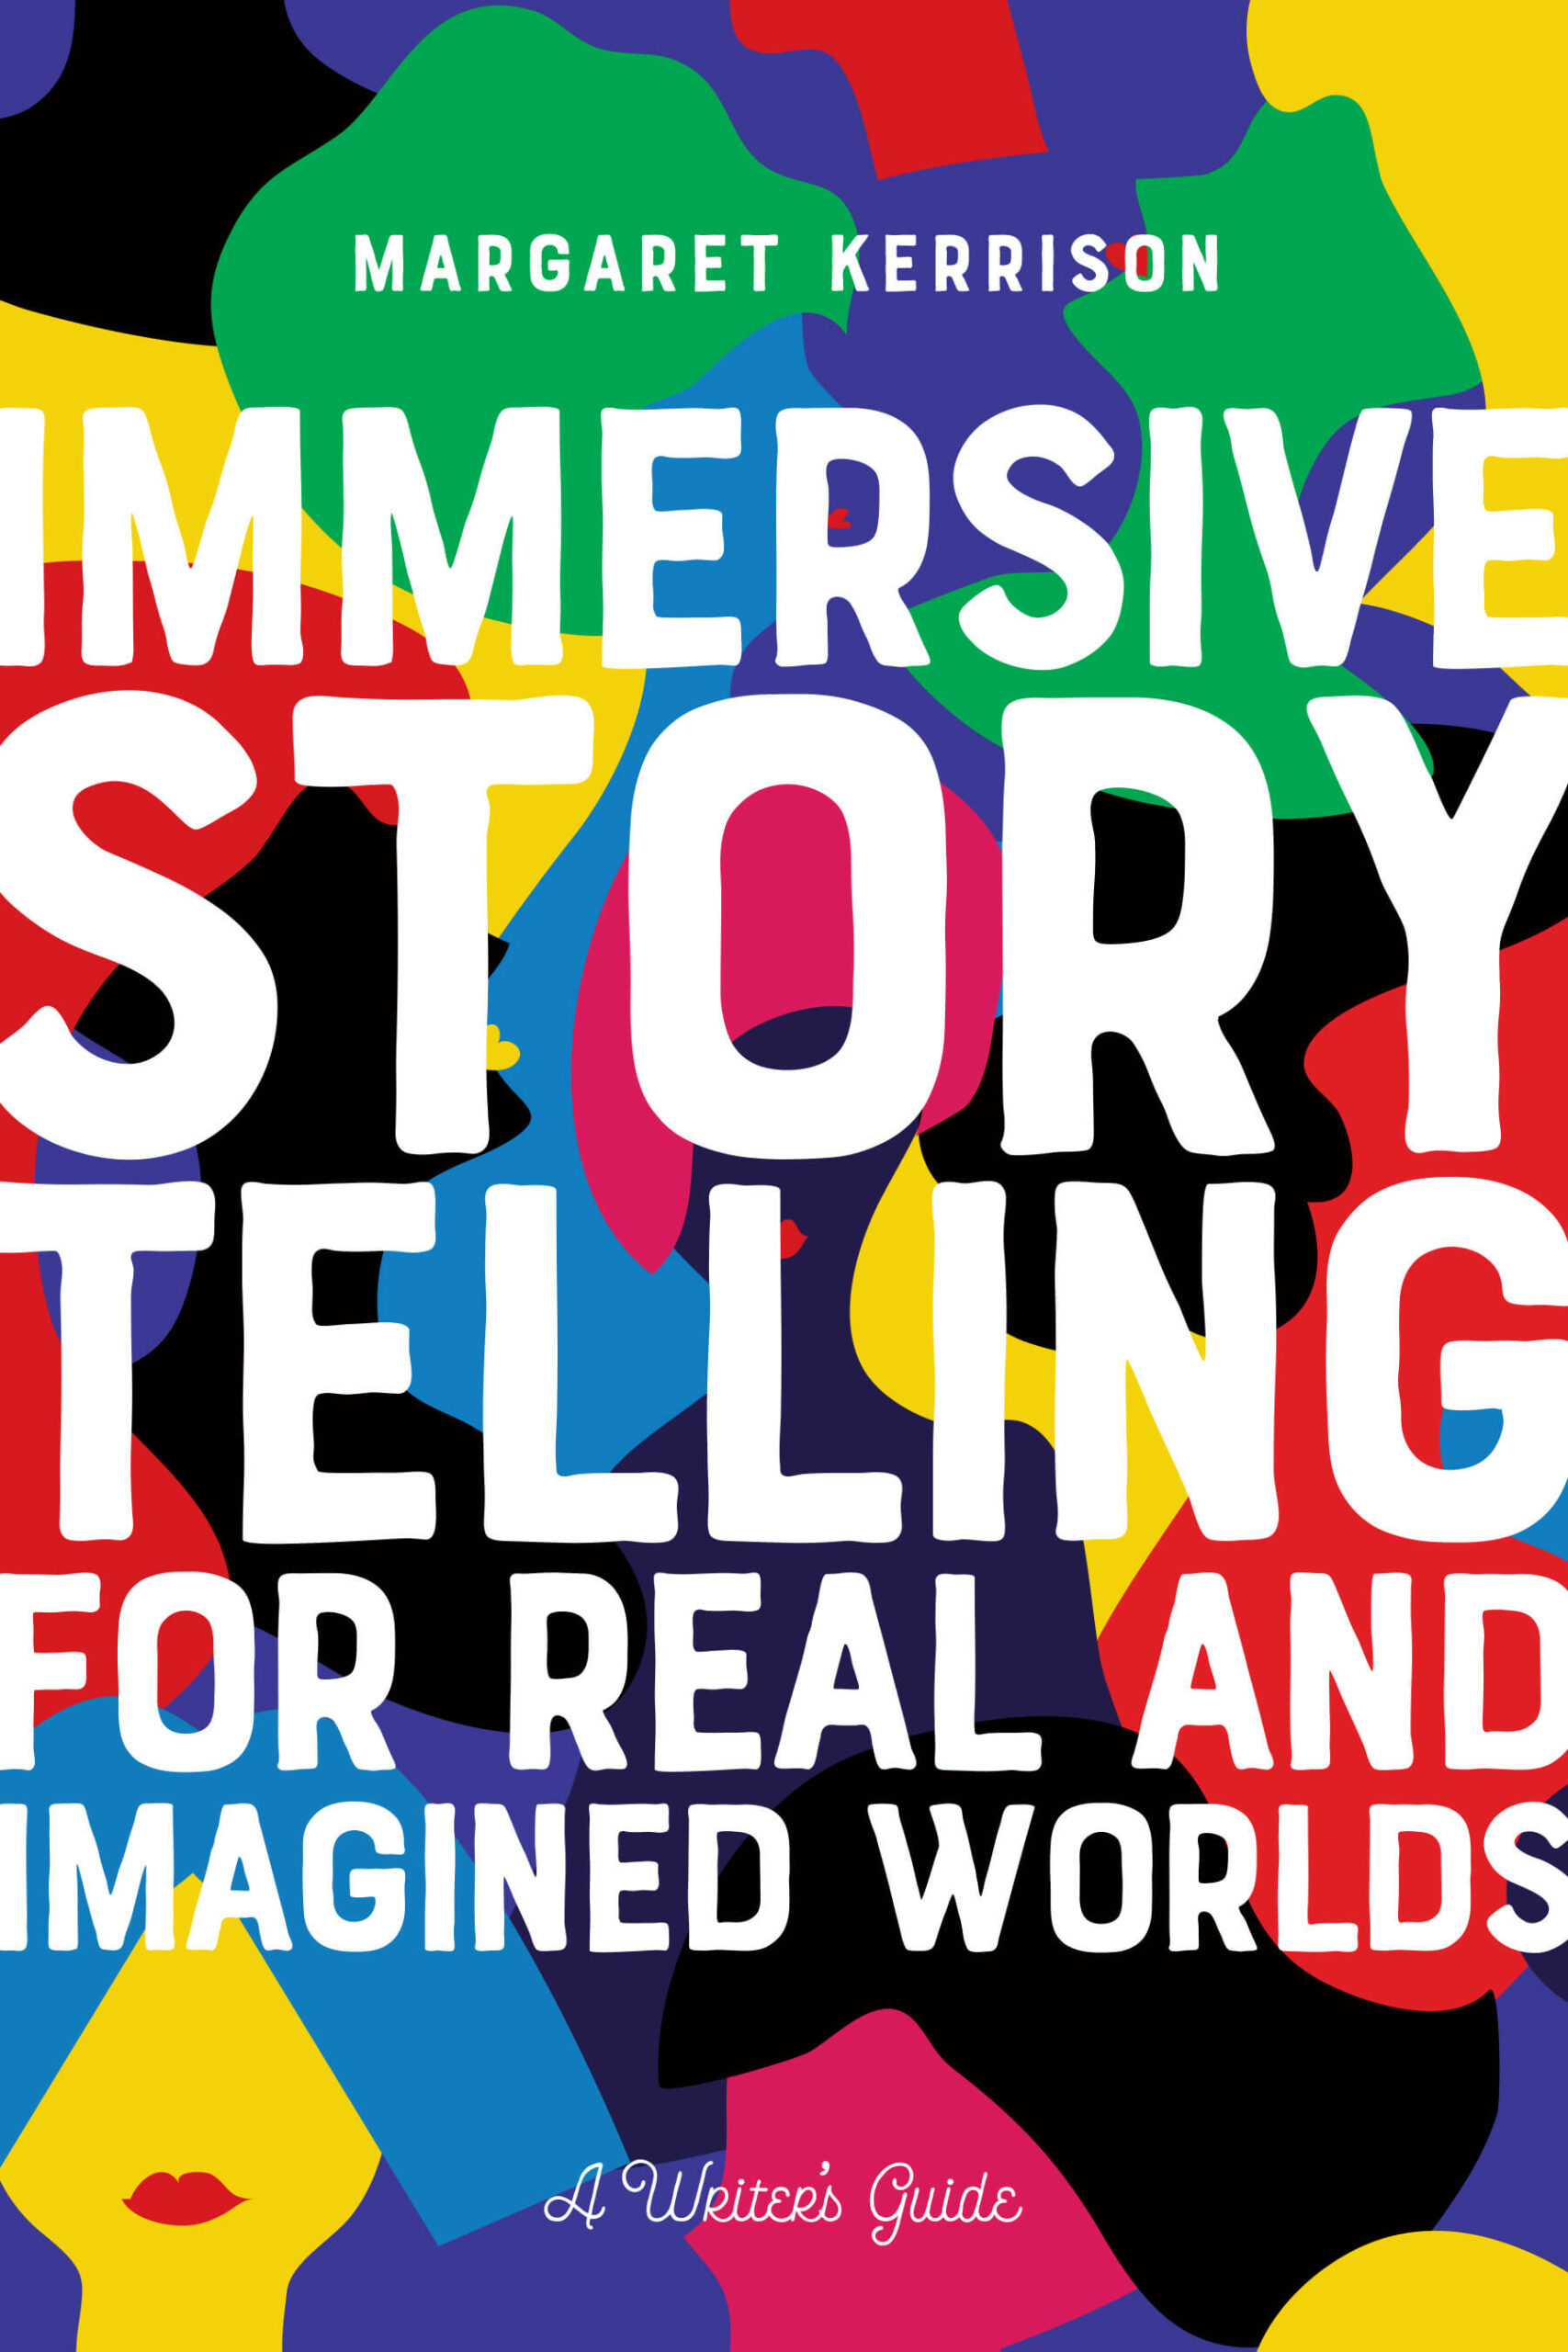 Immersive Storytelling for Real and Imagined Worlds: A Writer’s Guide